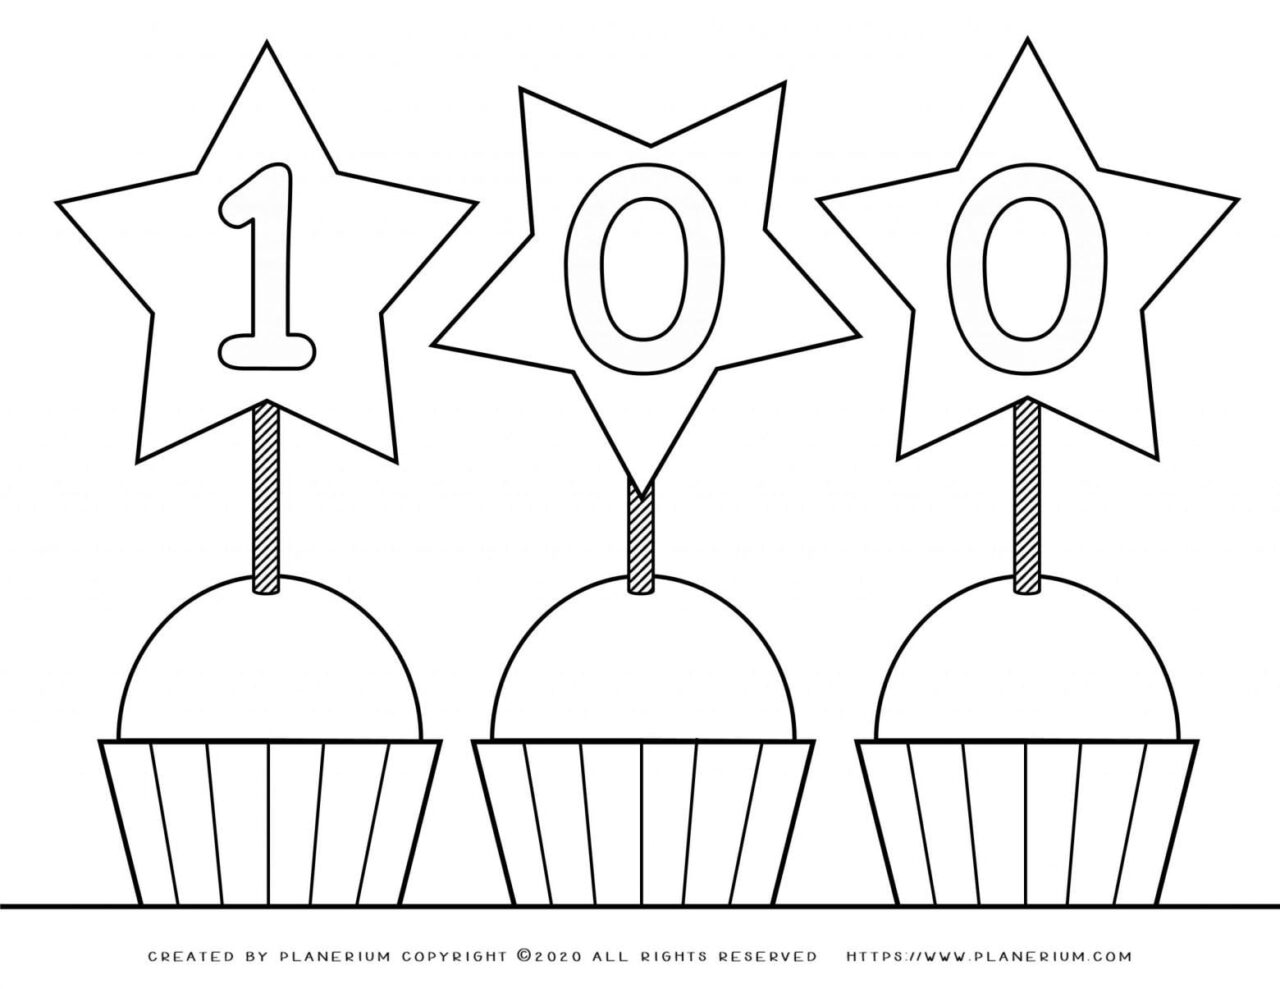 100 days of School - Coloring Page - Stars | Planerium